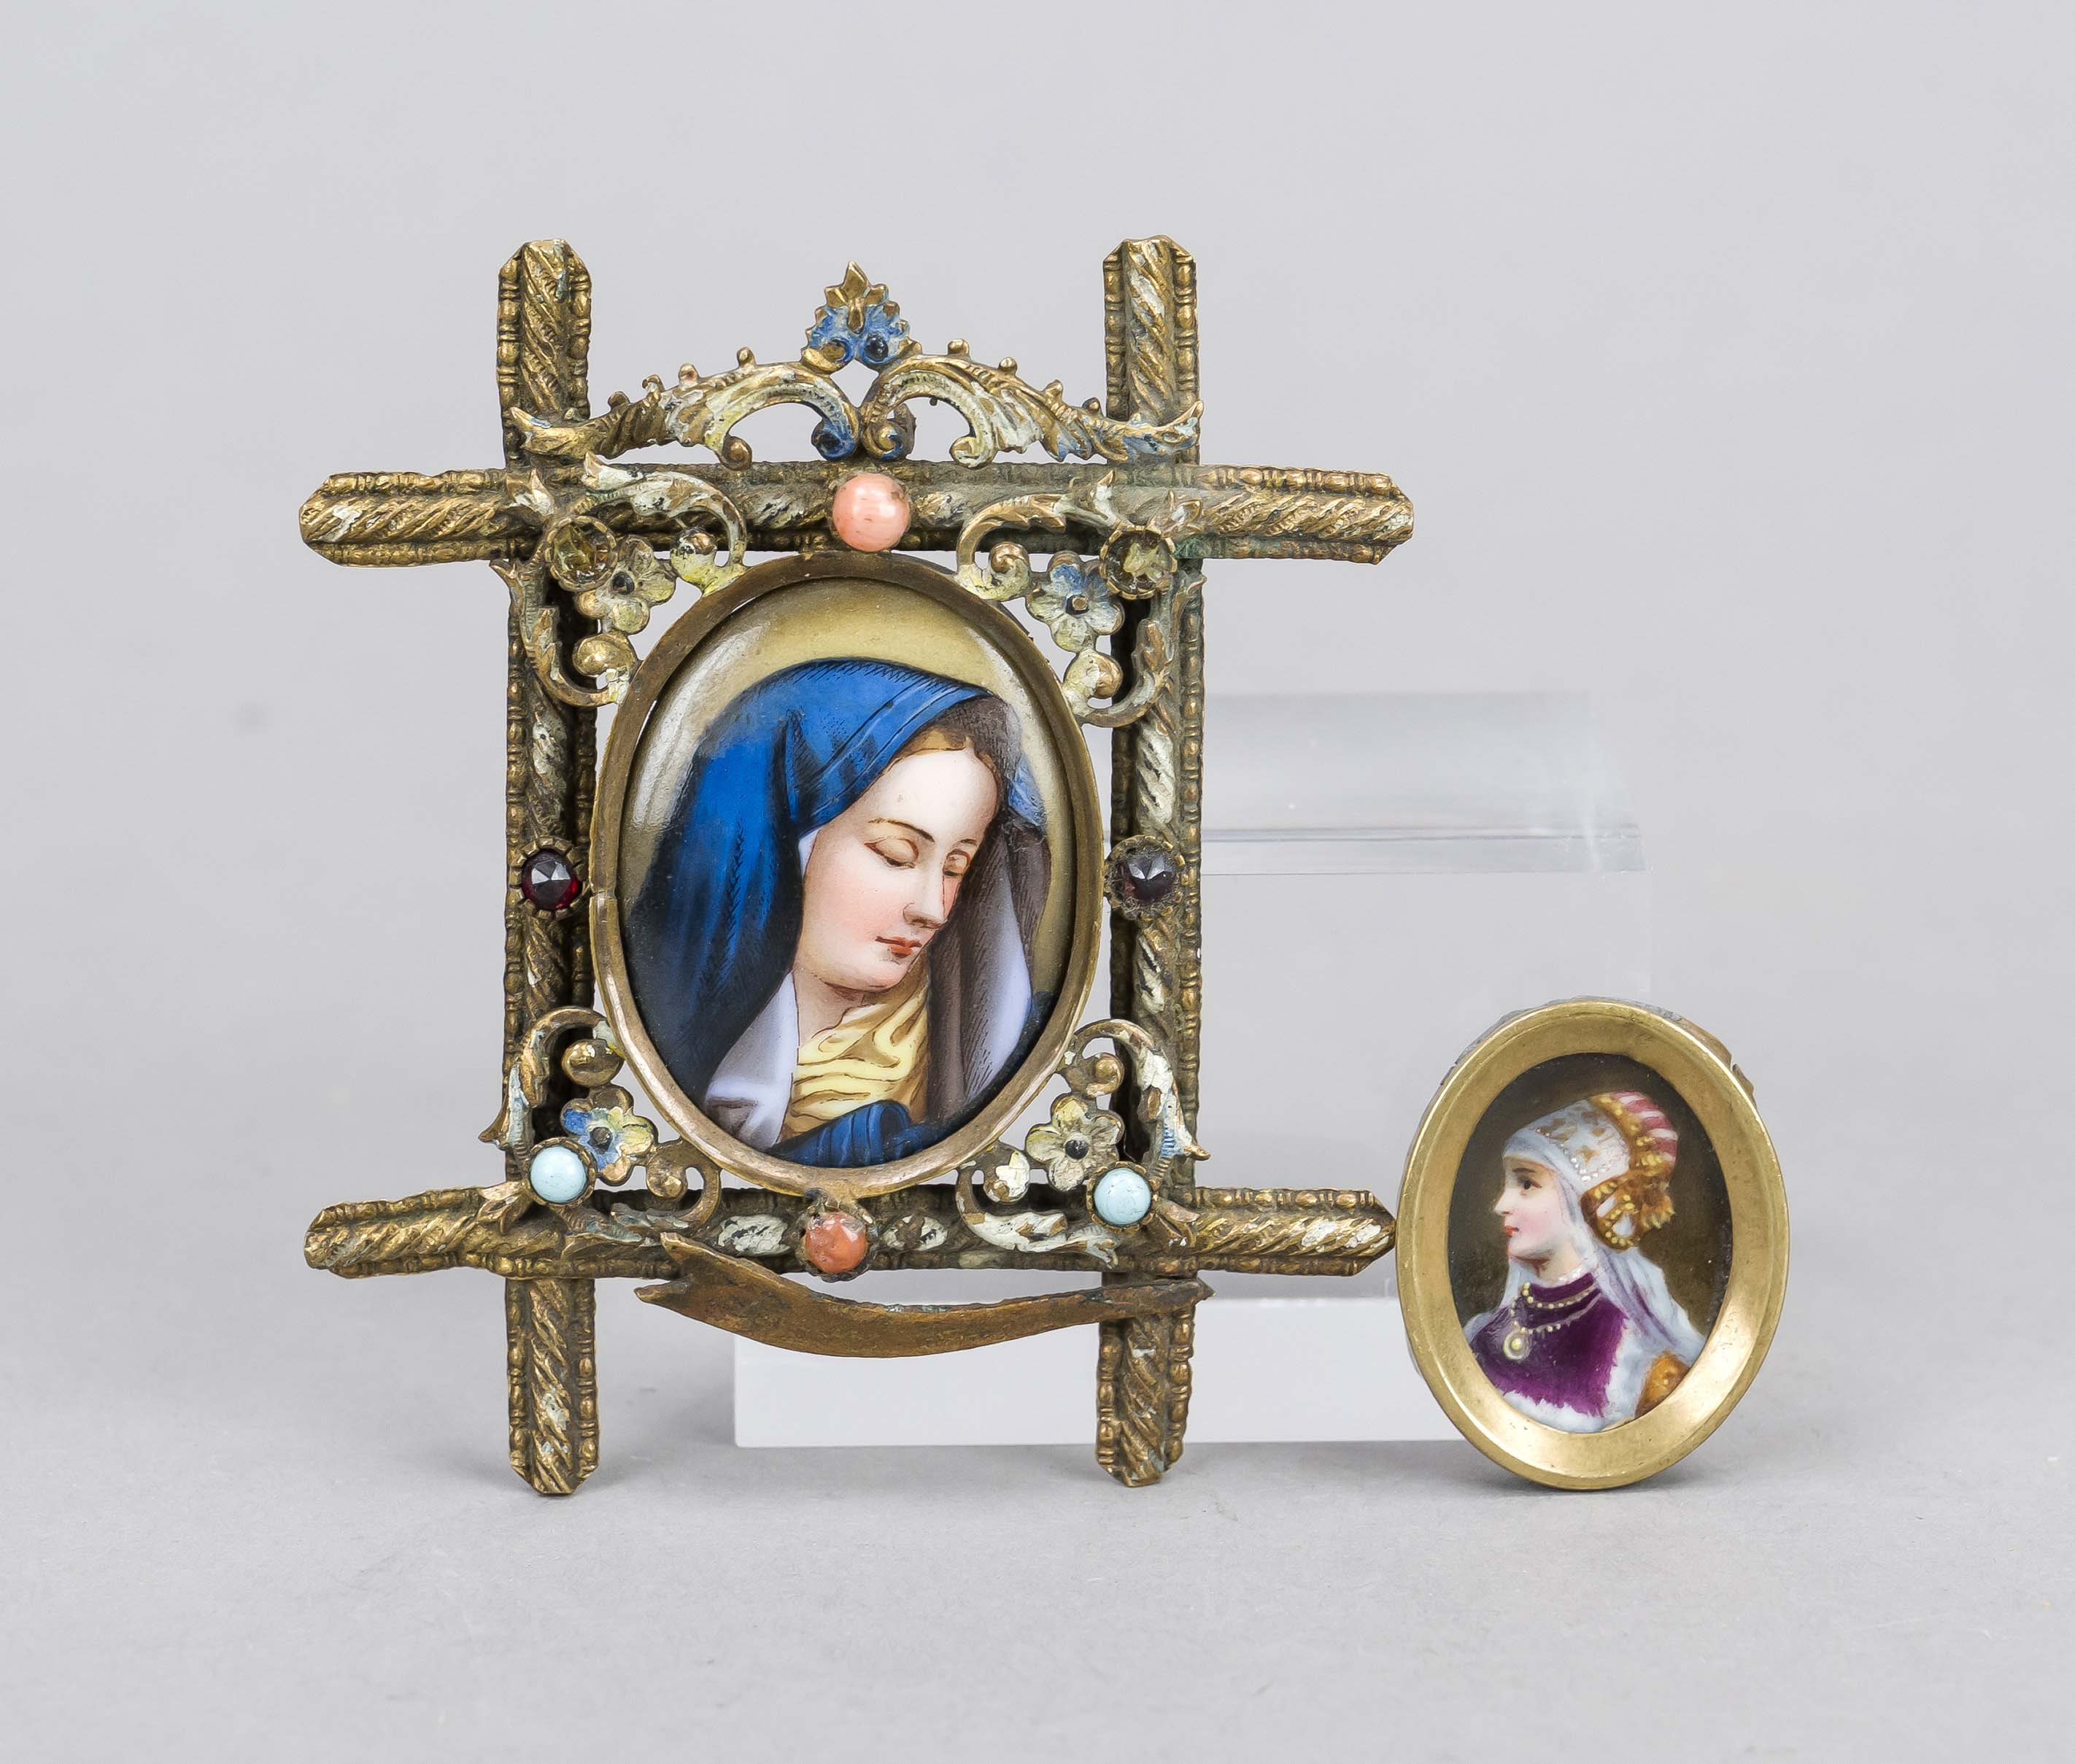 Devotional picture, 19th century, polychrome portrait of the Virgin Mary in an oval, 4 x 3 cm, in an